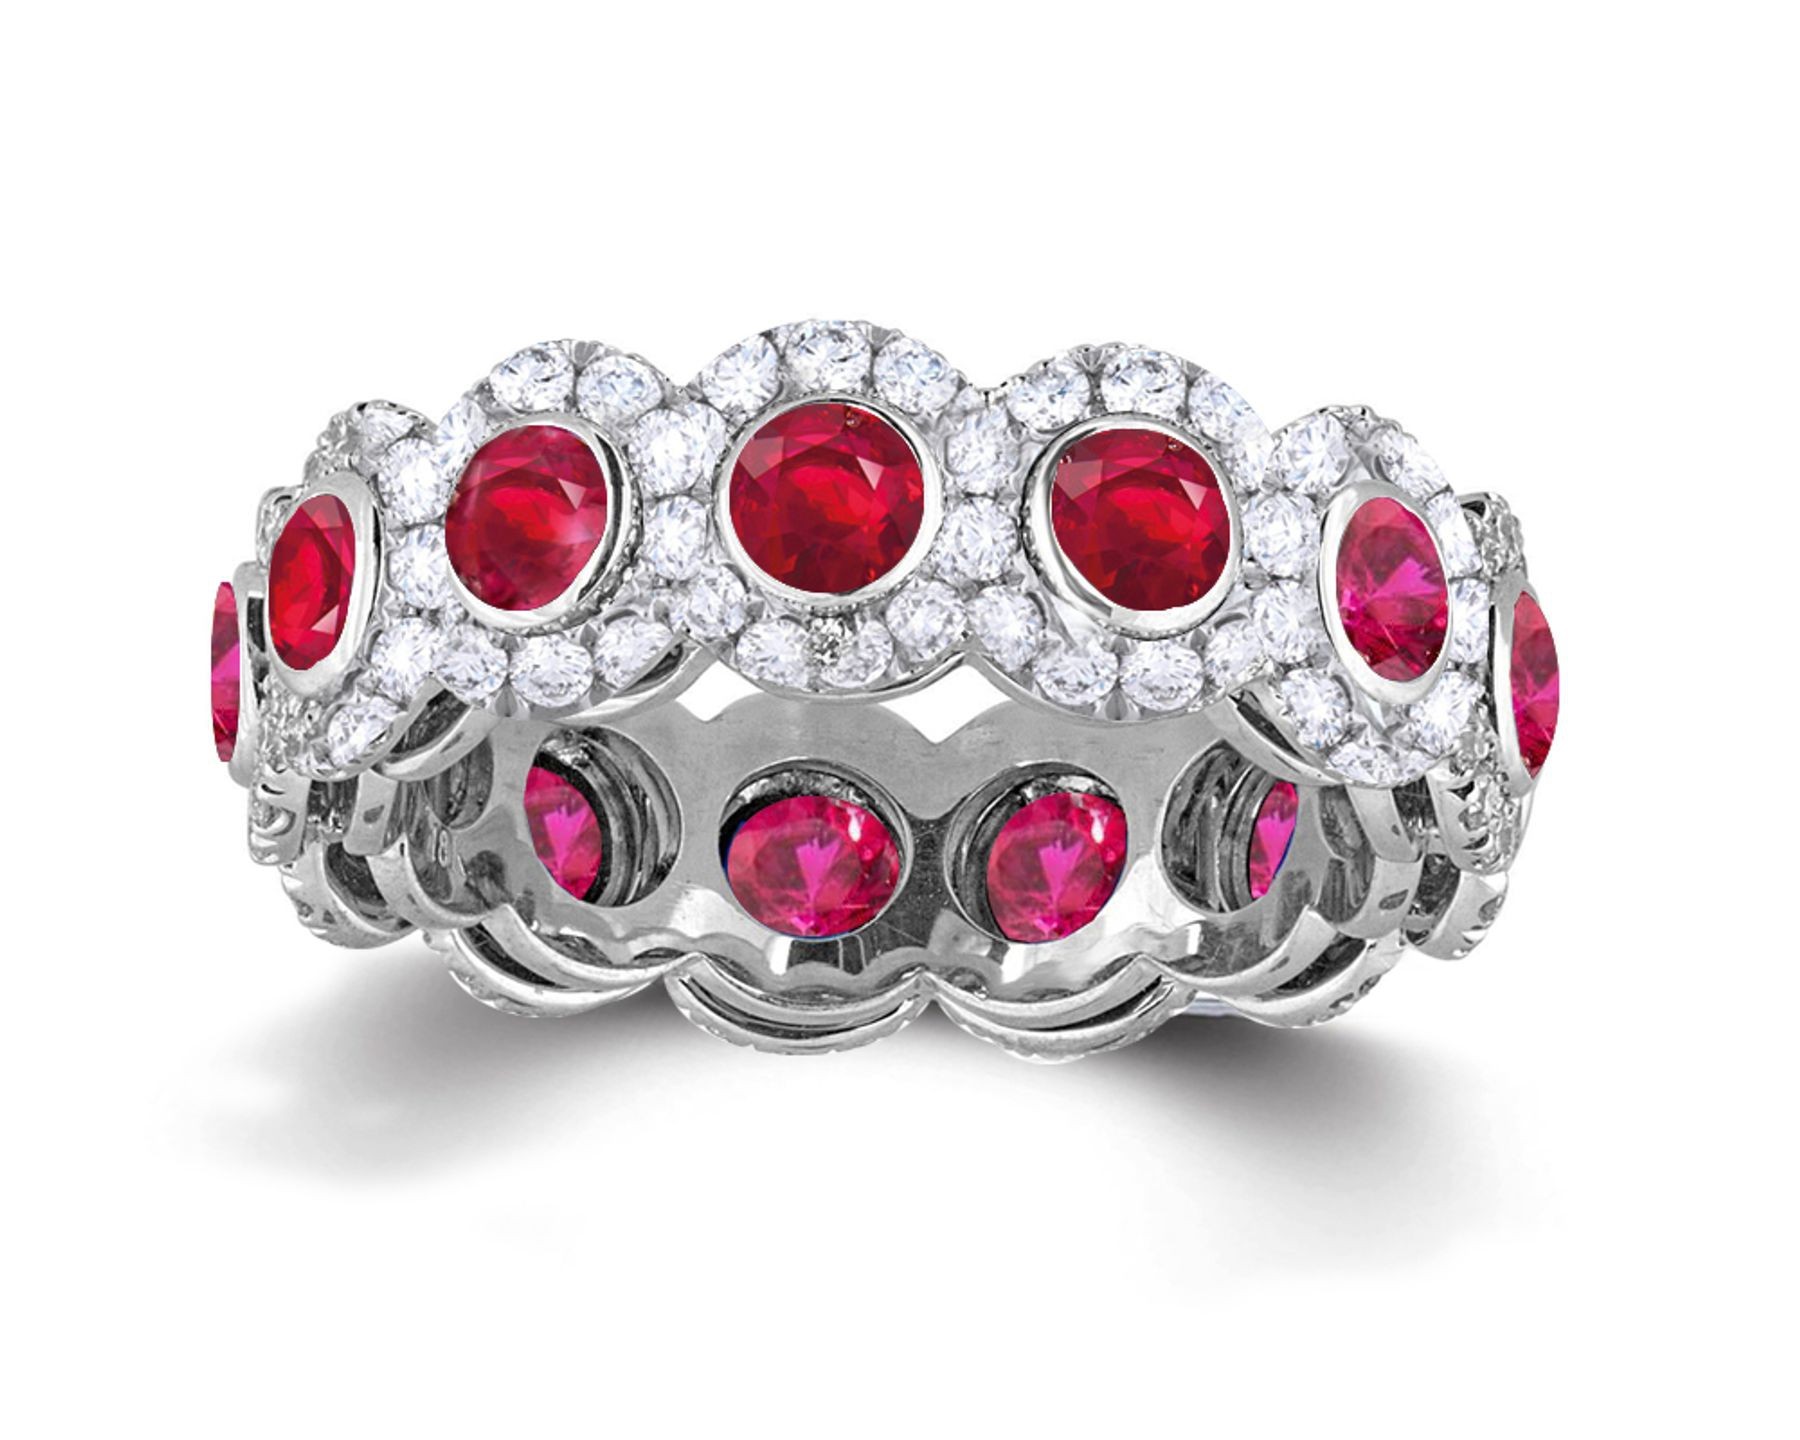 Shop Fine Quality Made To Order Round pave Prong Bezel Set Diamond & Red Ruby Eternity Style Wedding Bands